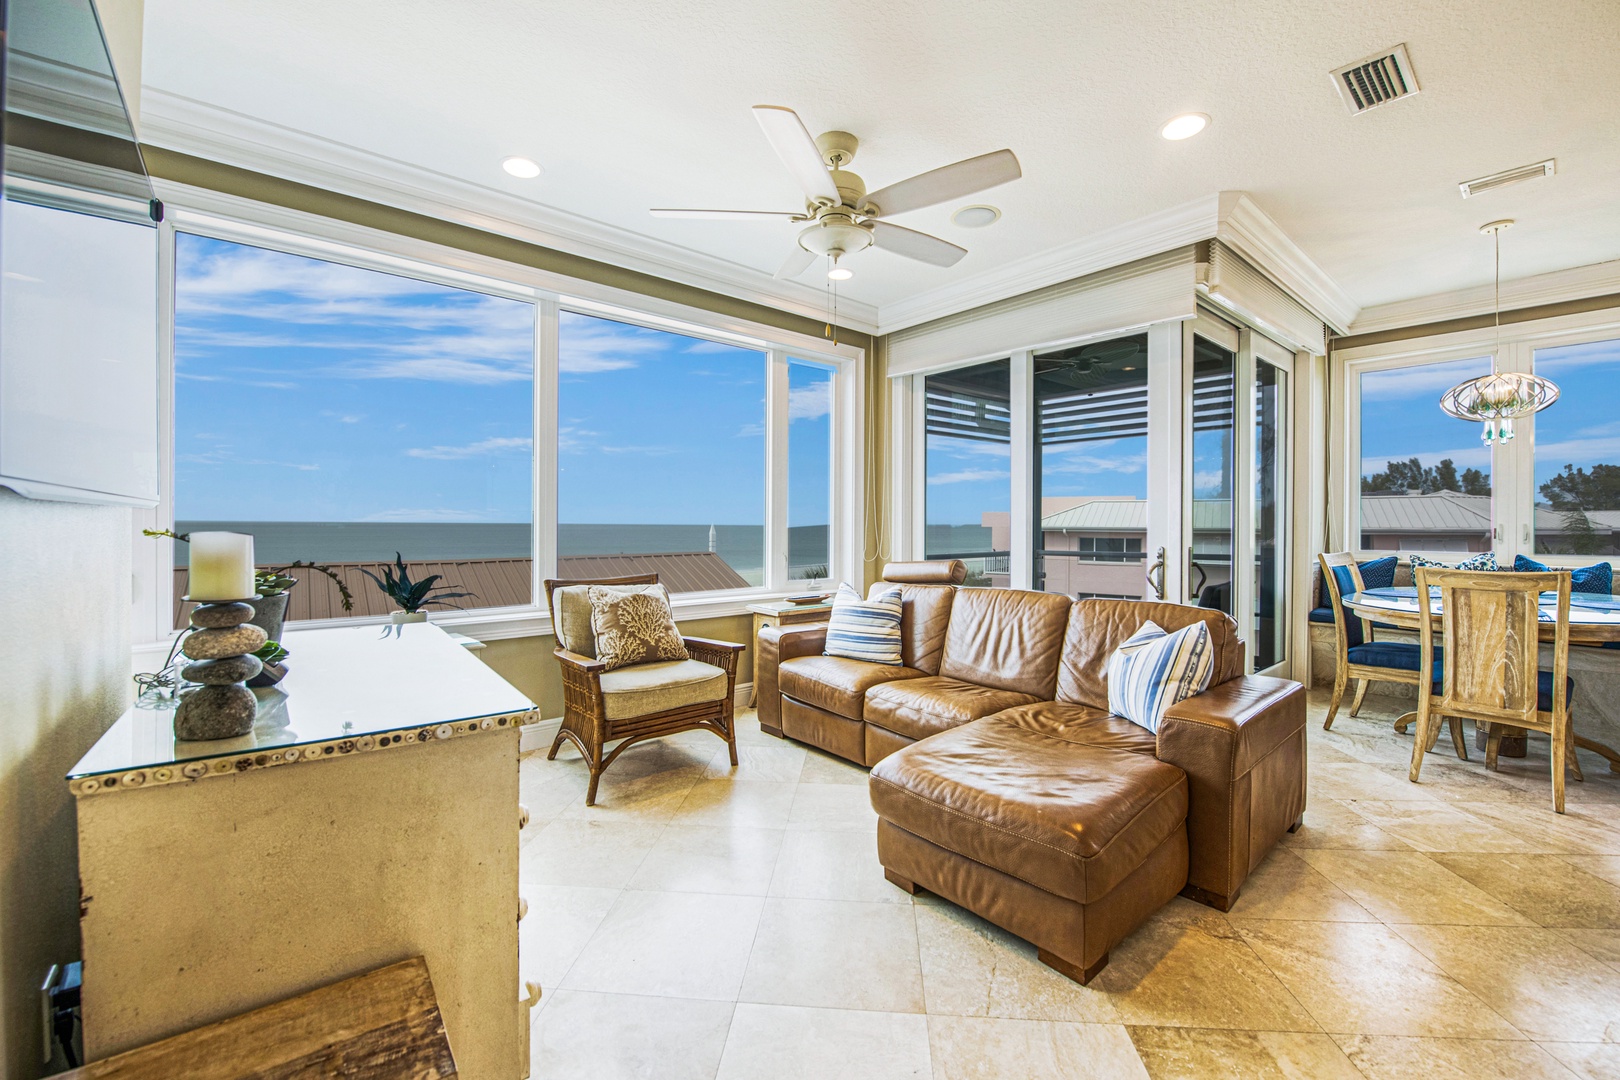 Side A - Upper Level - Living Area - Views of Gulf